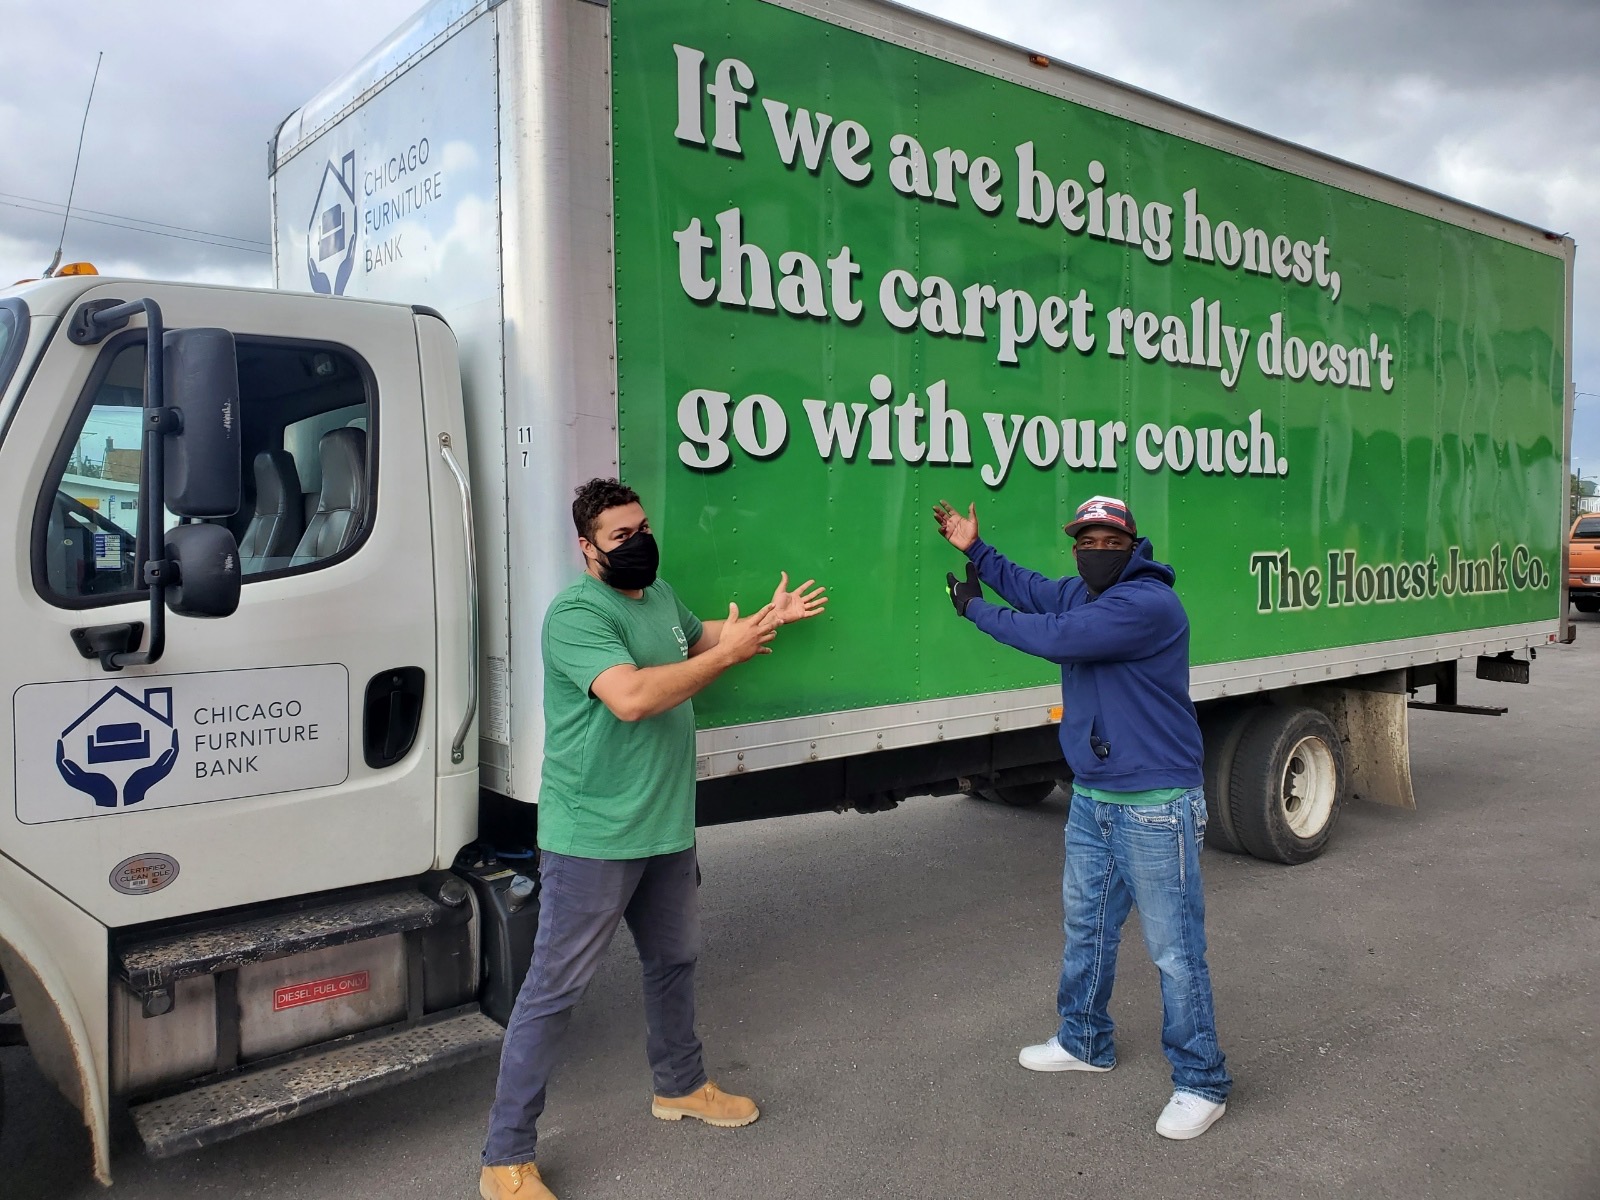 Honest Junk truck with two people posing outside of it. Truck reads "If we are being honest, that carpet doesn't go with your couch"